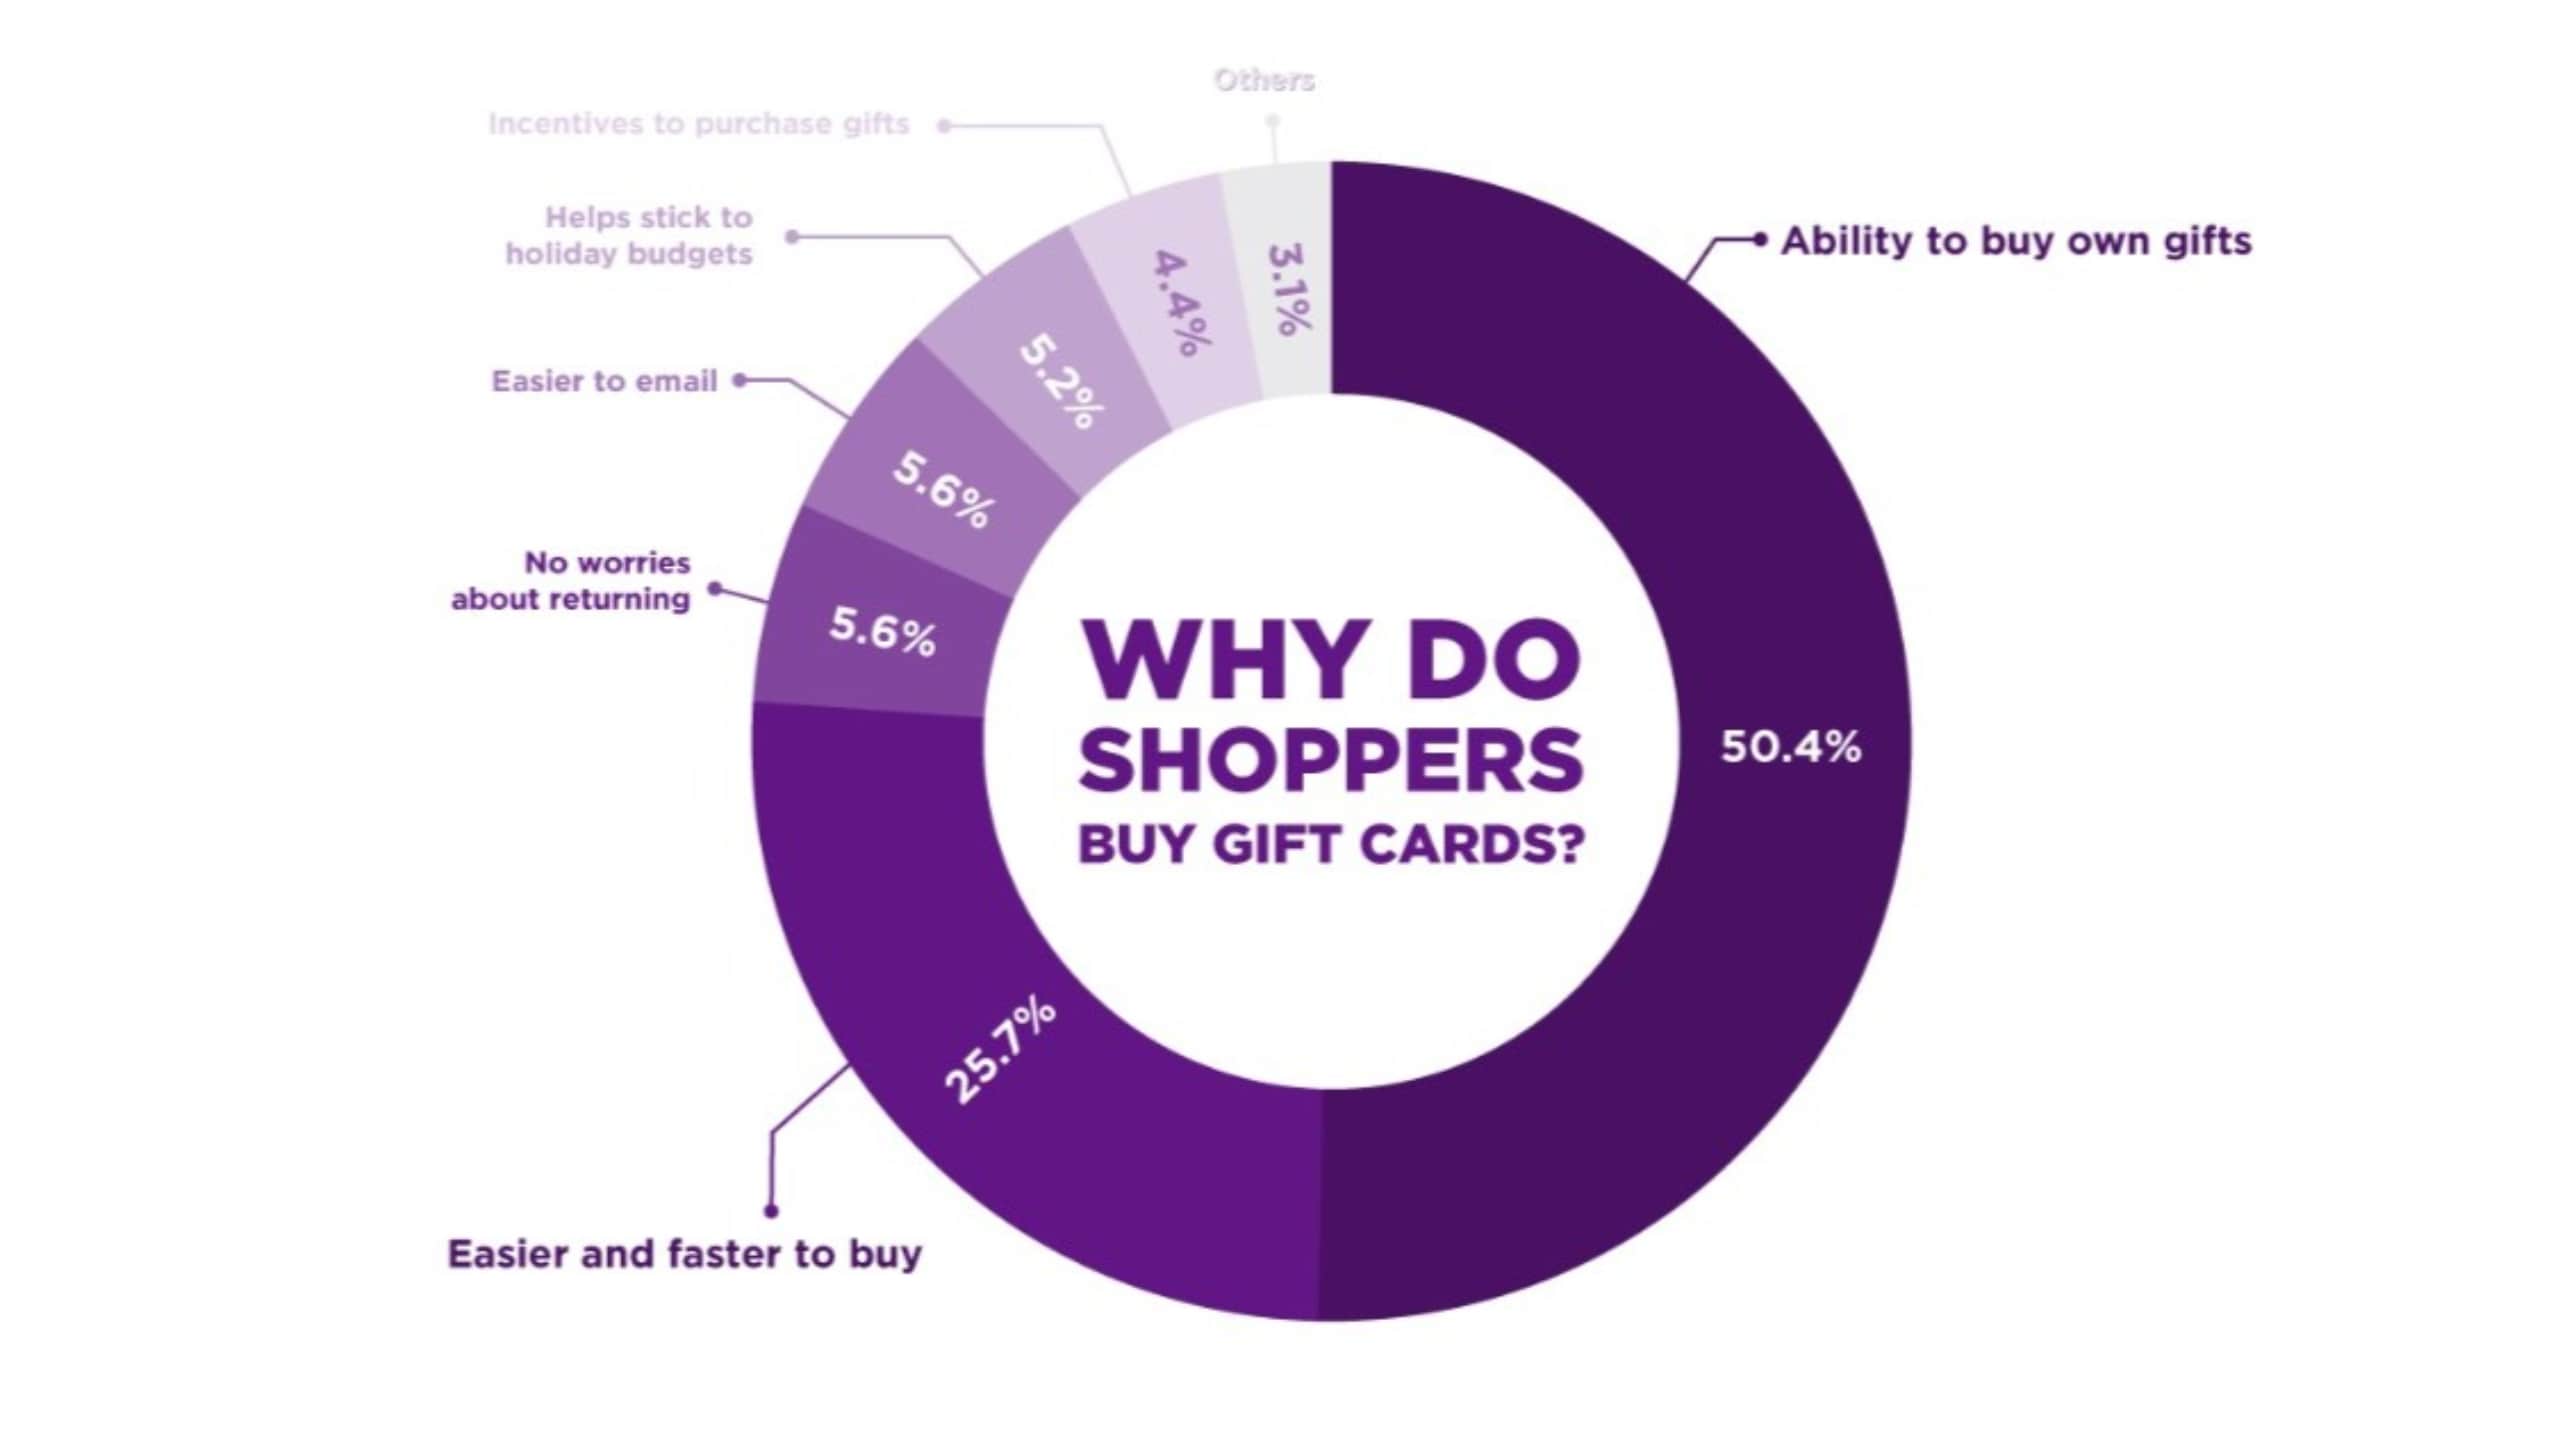 pie chart of the reasons why people buy gift cards